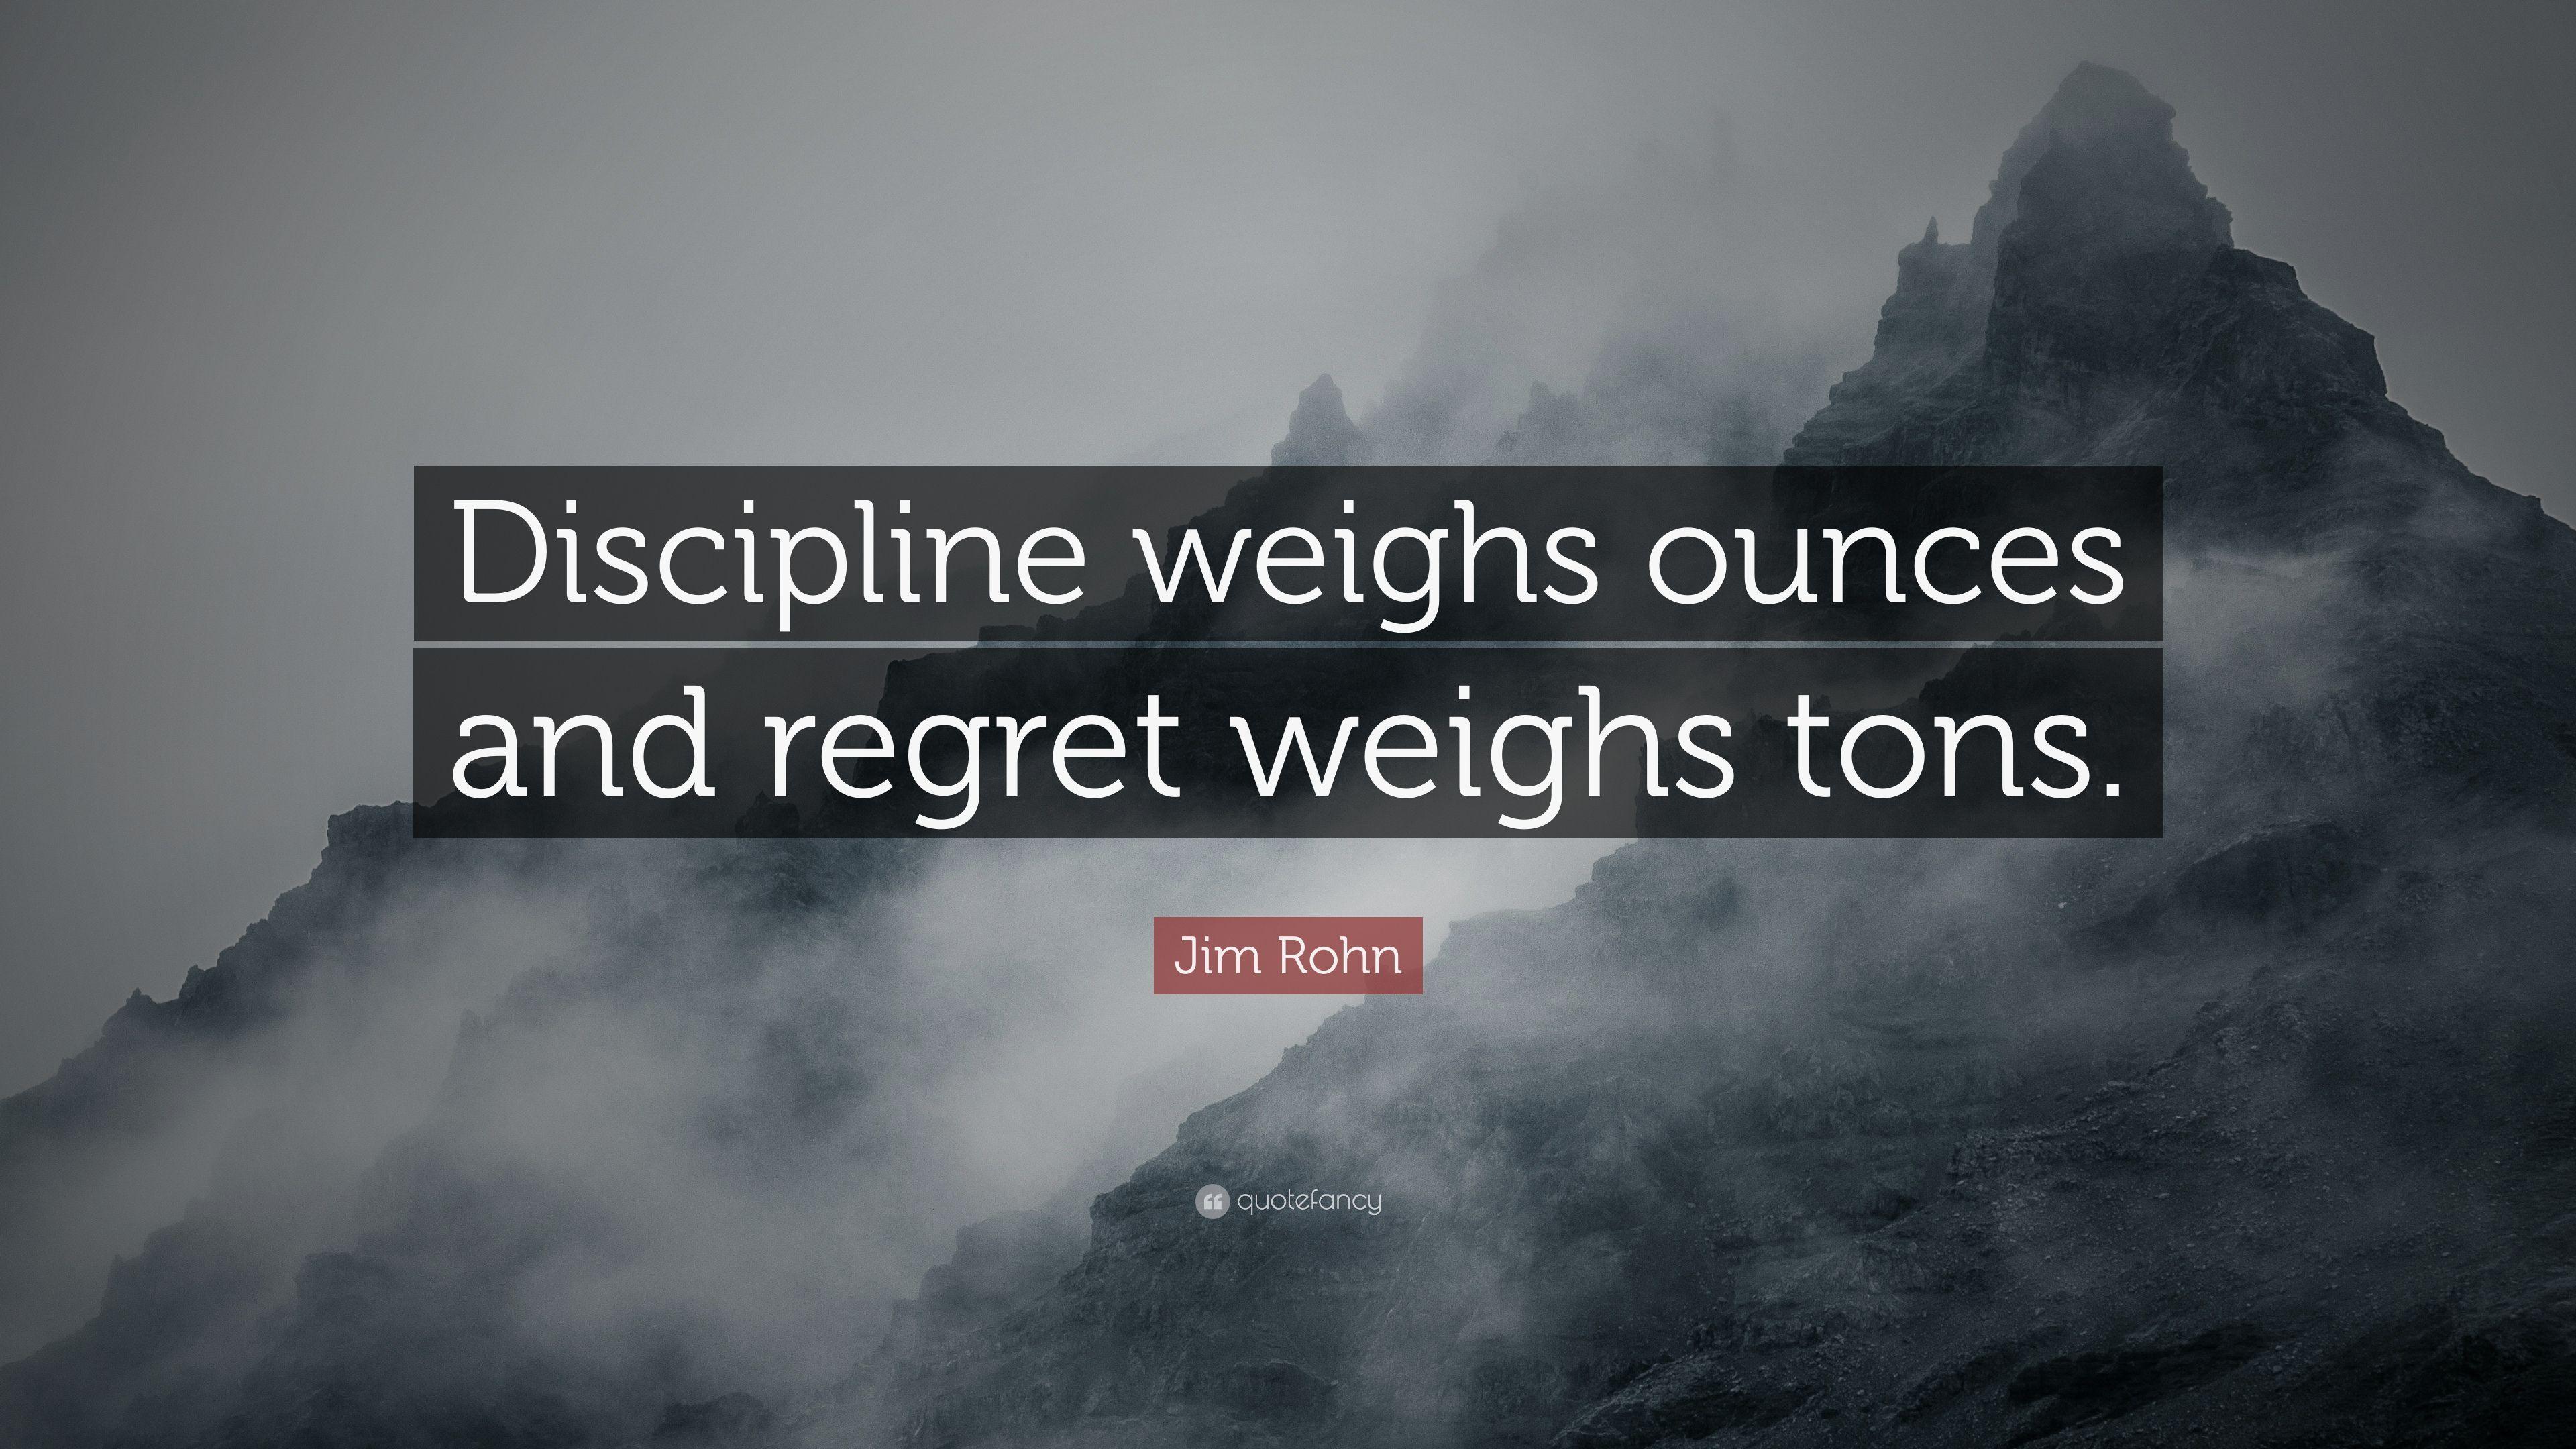 Jim Rohn Quote: “Discipline weighs ounces and regret weighs tons